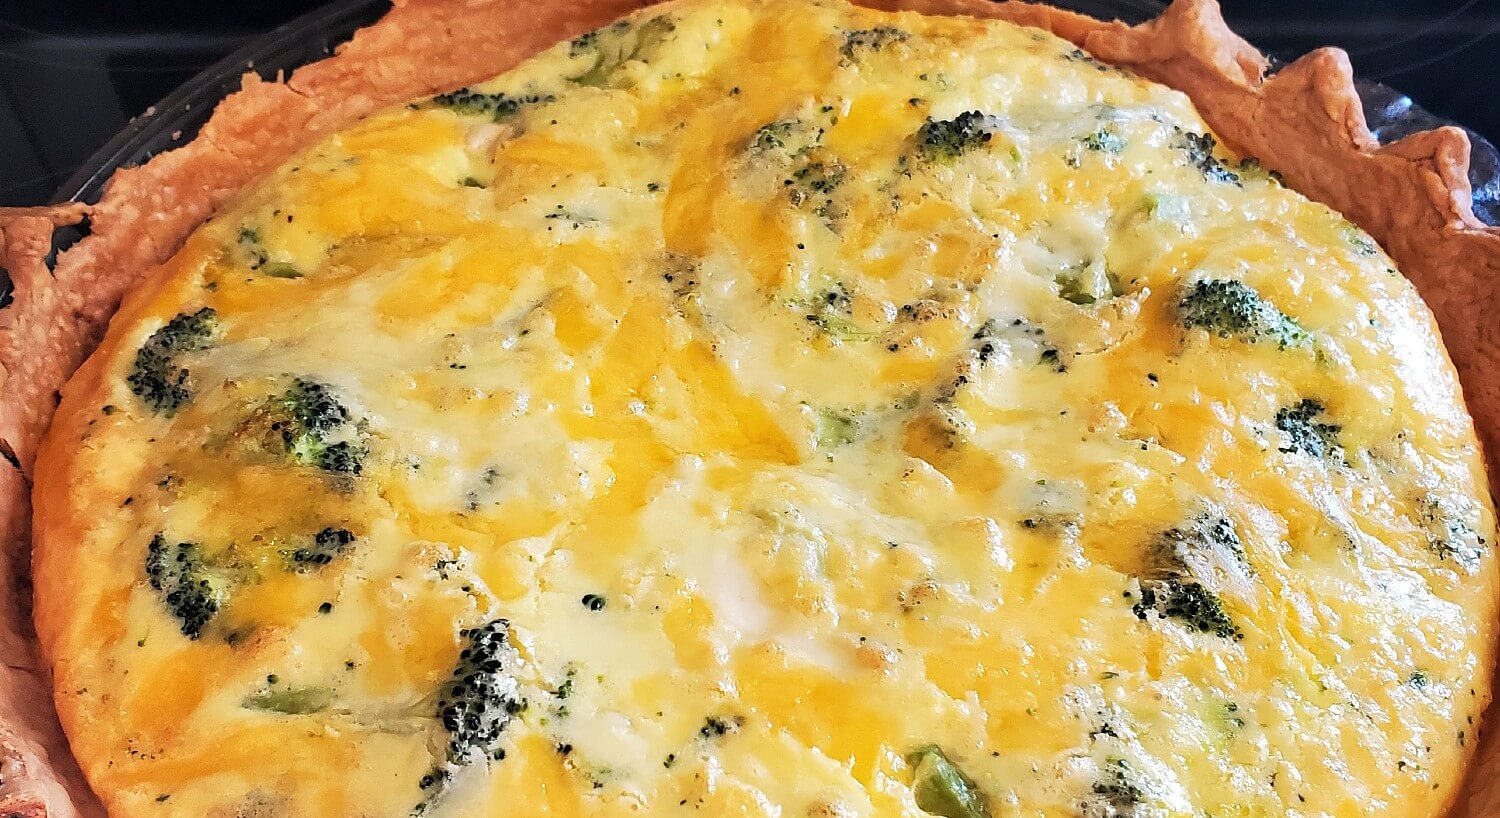 Large round baked egg quiche with a flaky pie crust